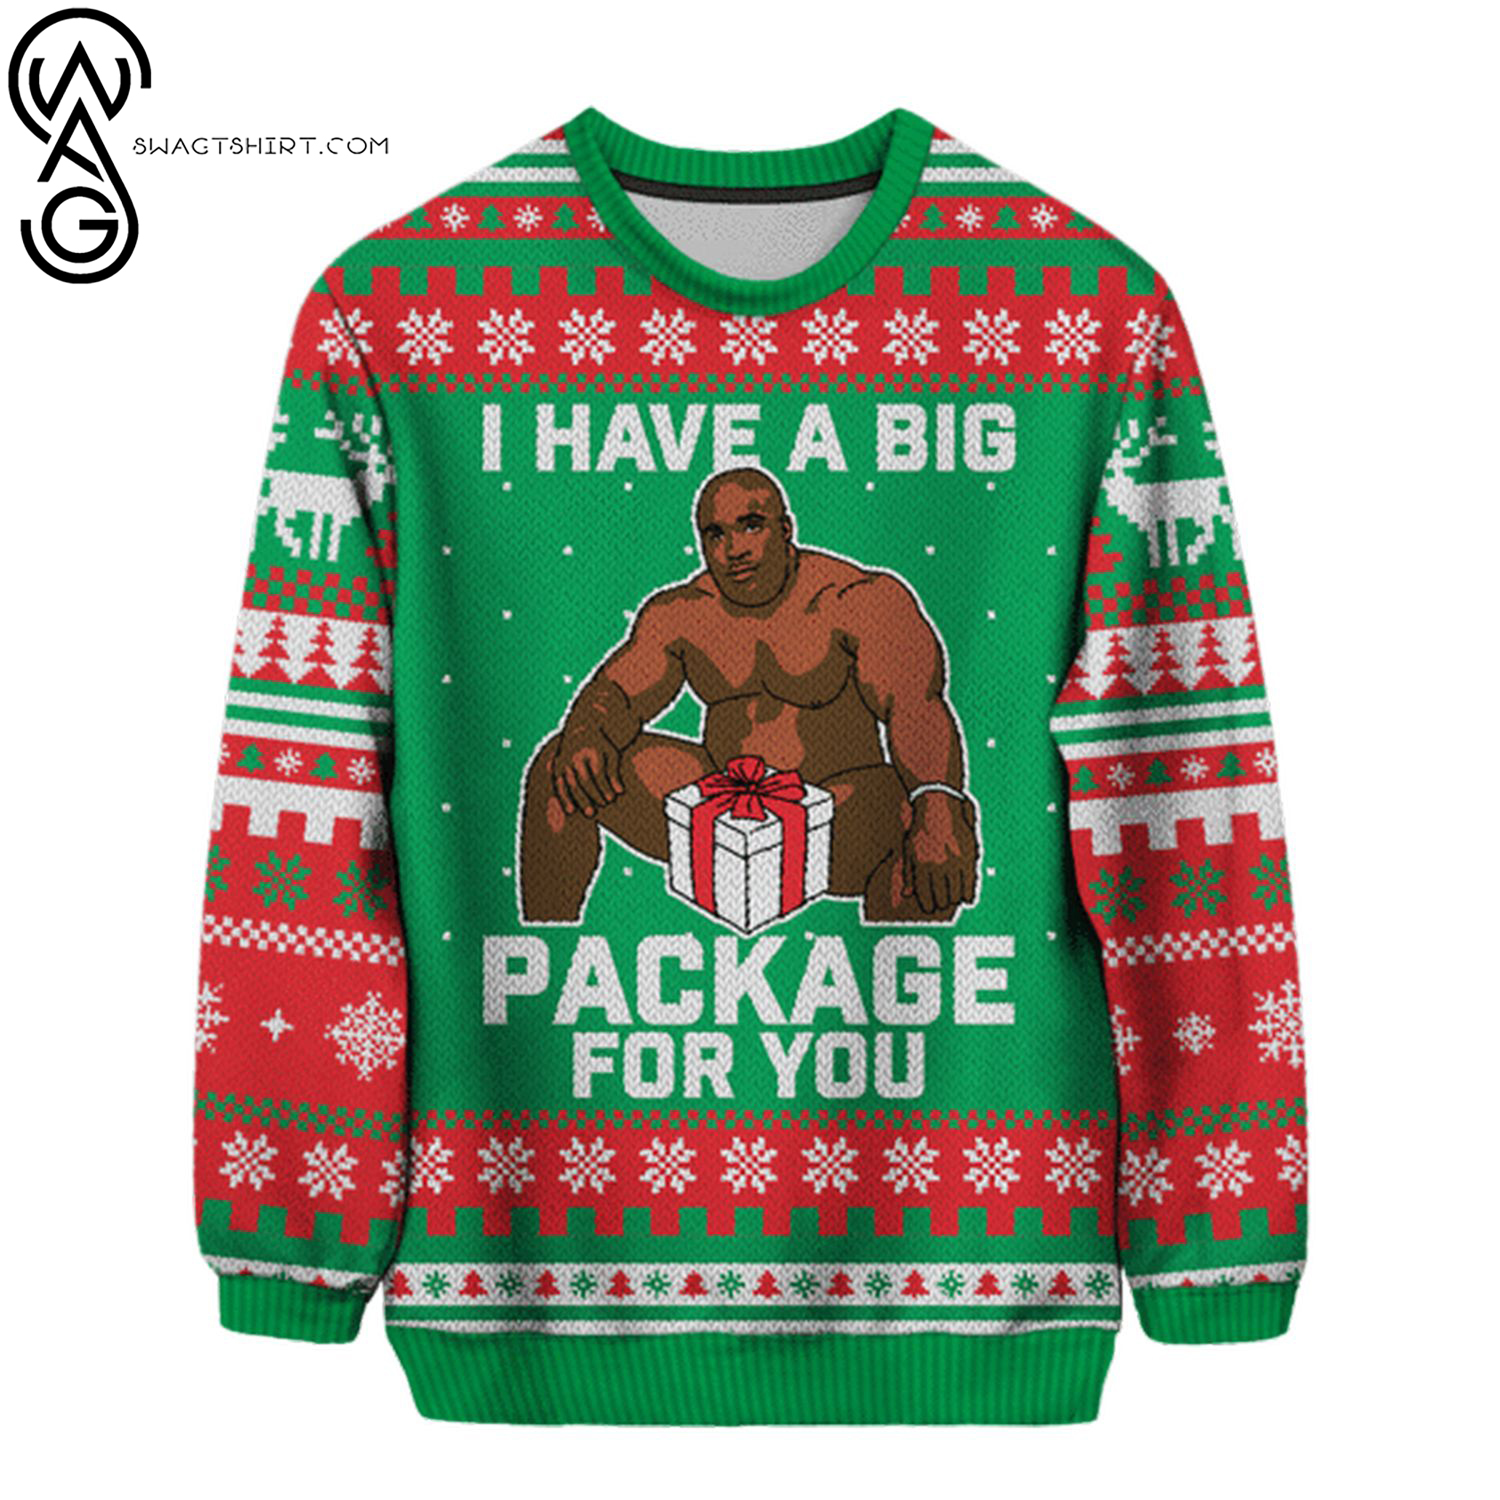 Big black i have a big package for you ugly christmas sweater